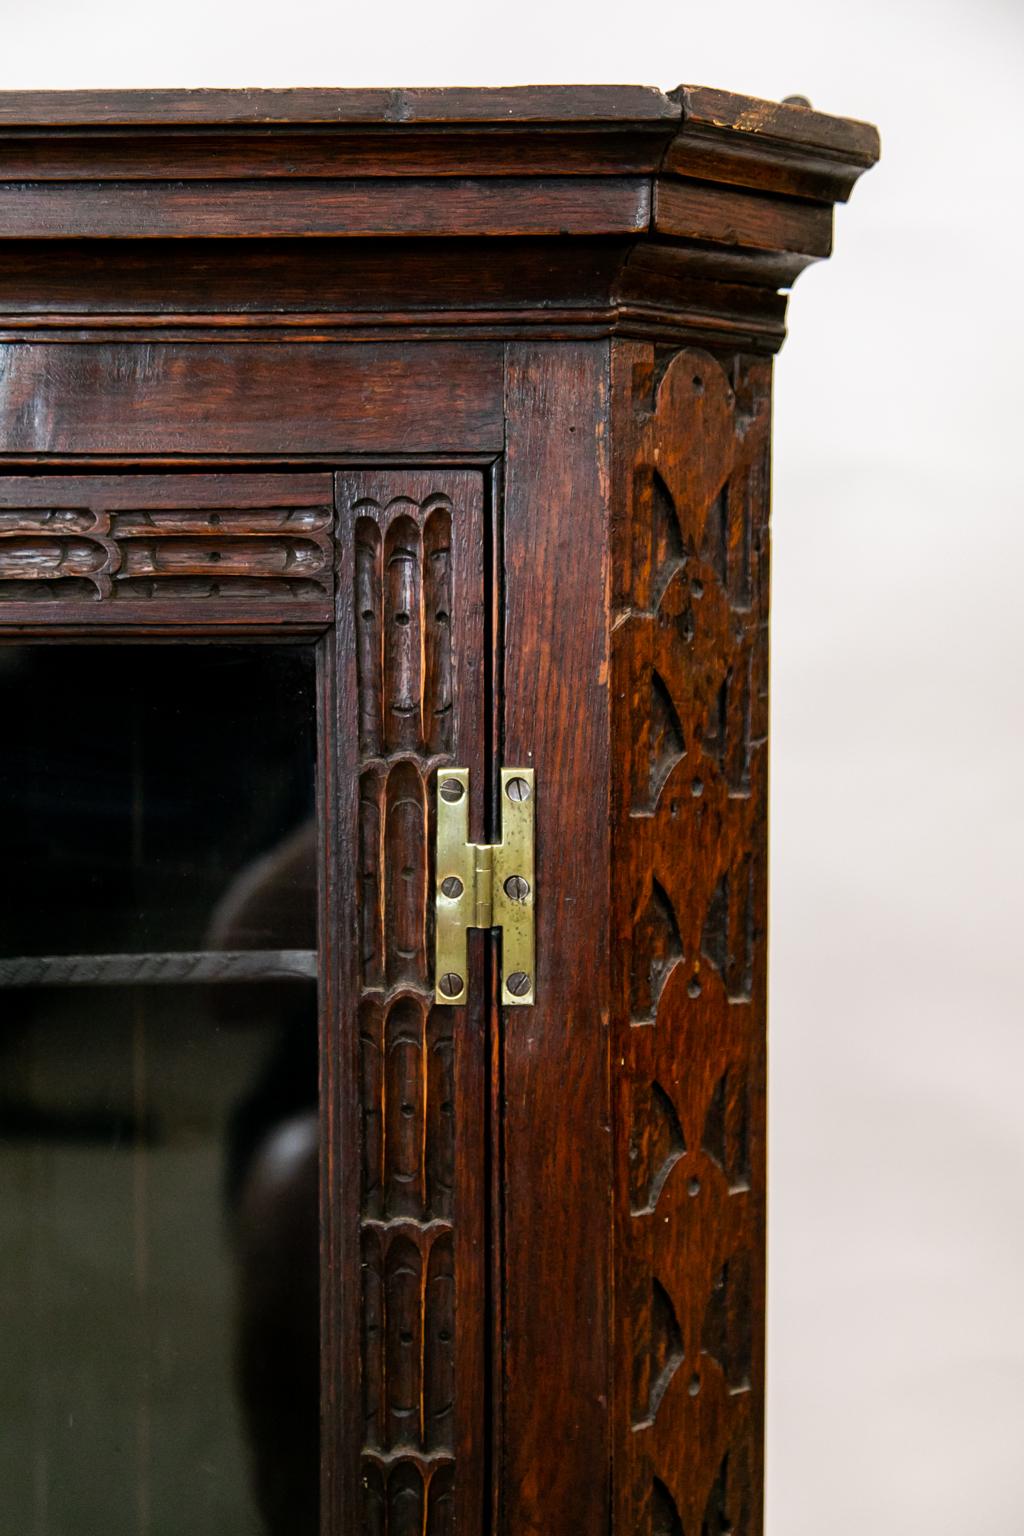 The door of this oak hanging corner cupboard is carved with repeating fluting. The side returns are carved with stylized tear drops. The interior has two fixed butterfly shelves.